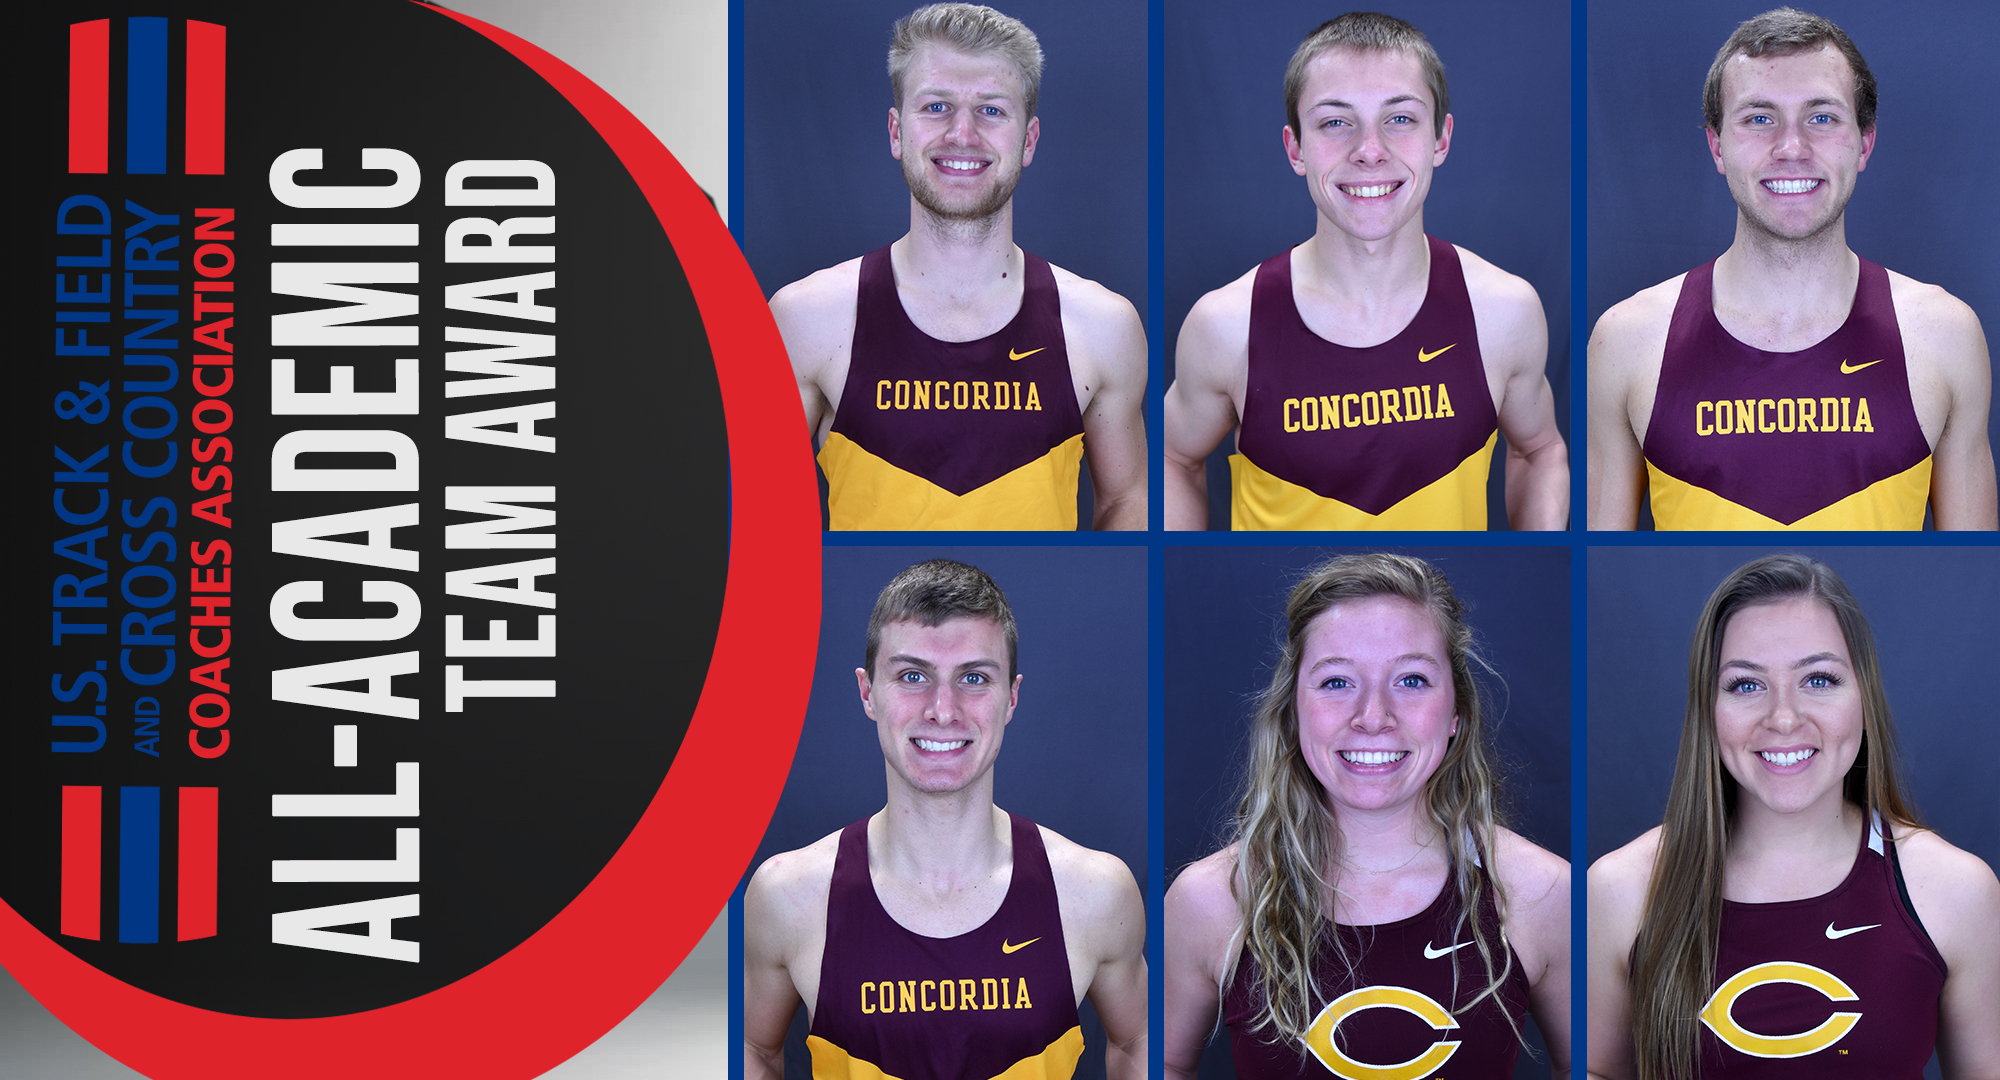 Matt Bye, Jesse Middendorf, Colin Schuller, Cal Wright, Josie Herrmann and Cayle Hovland all earned USTFCCCA Scholar All-Academic honors.